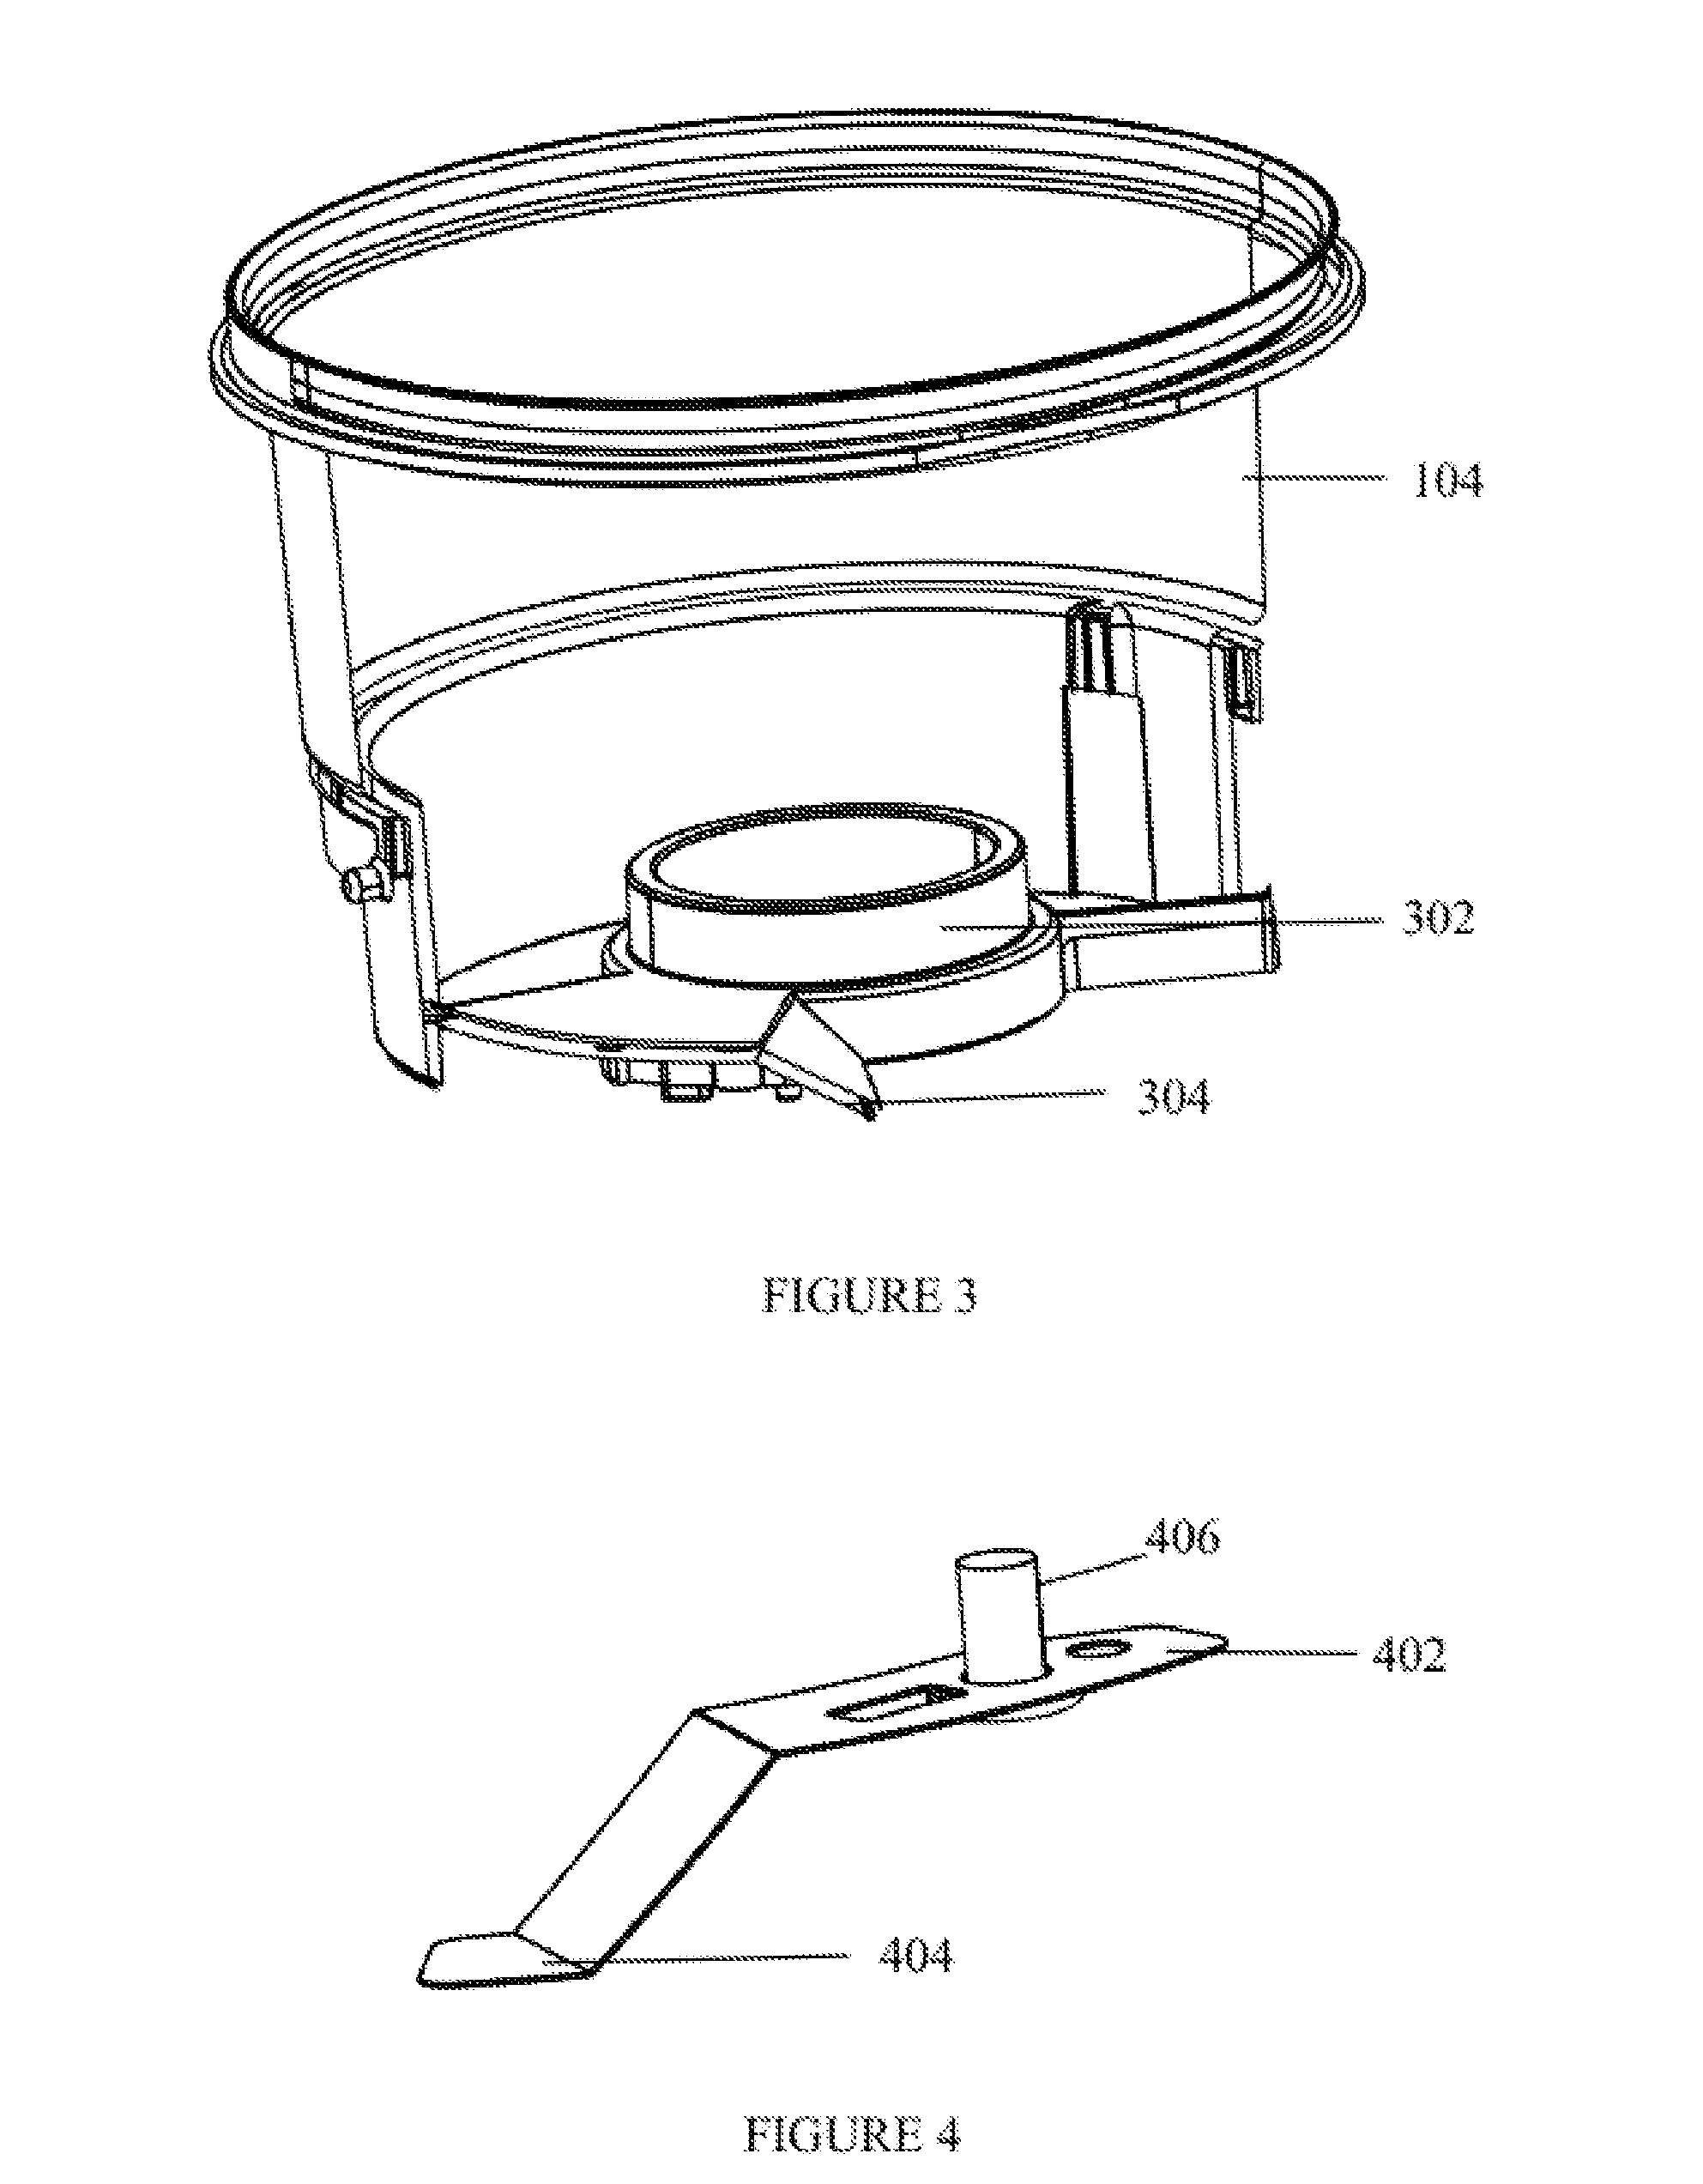 Dry flour dispensing apparatus and using the same for a food preparation appliance